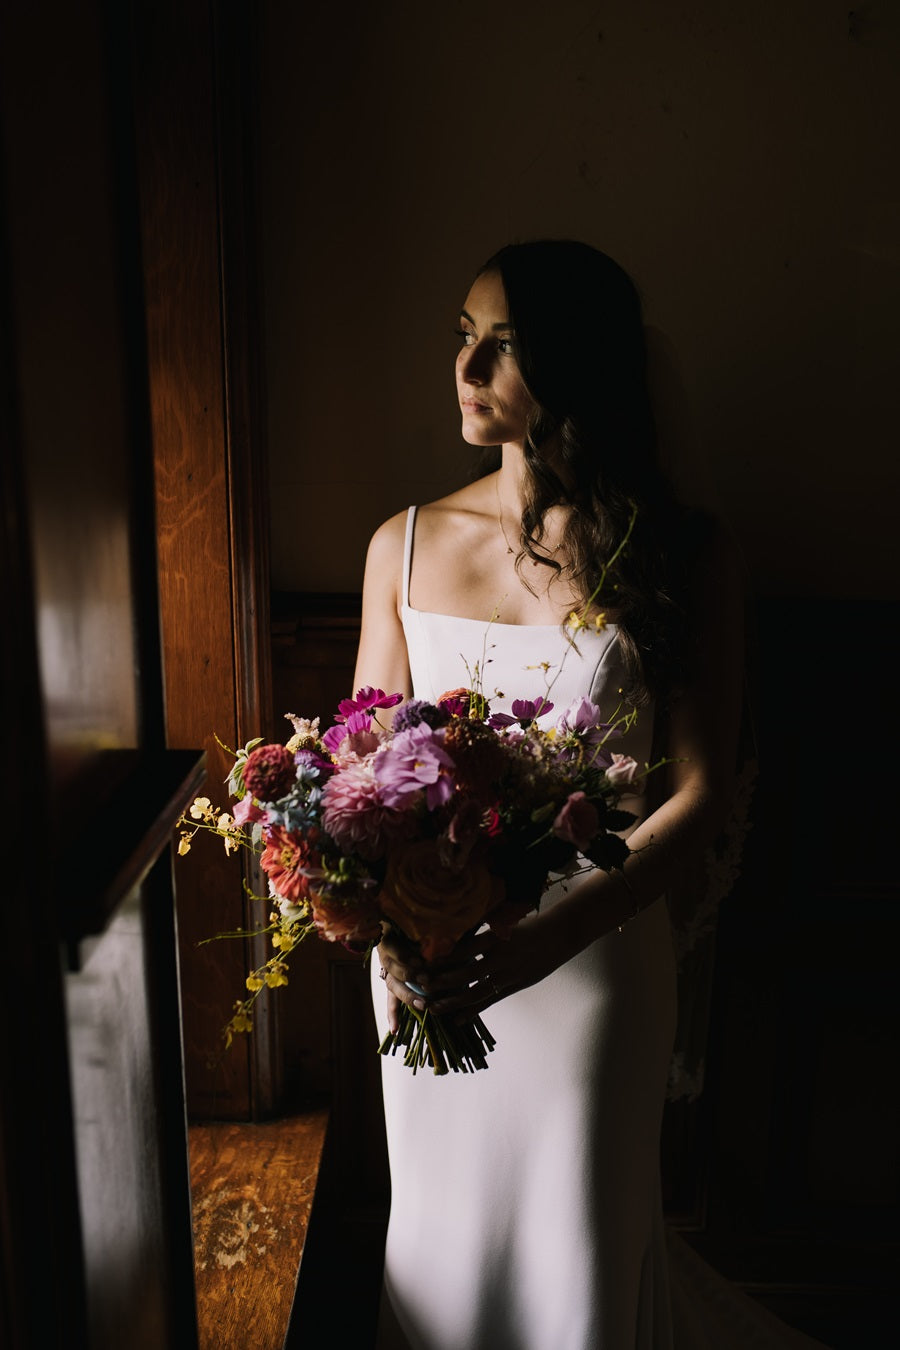 A dark and moody photo with dramatic lighting across the bride's face, front of dress, and bridal bouquet. The bouquet is full with a variety of colors.